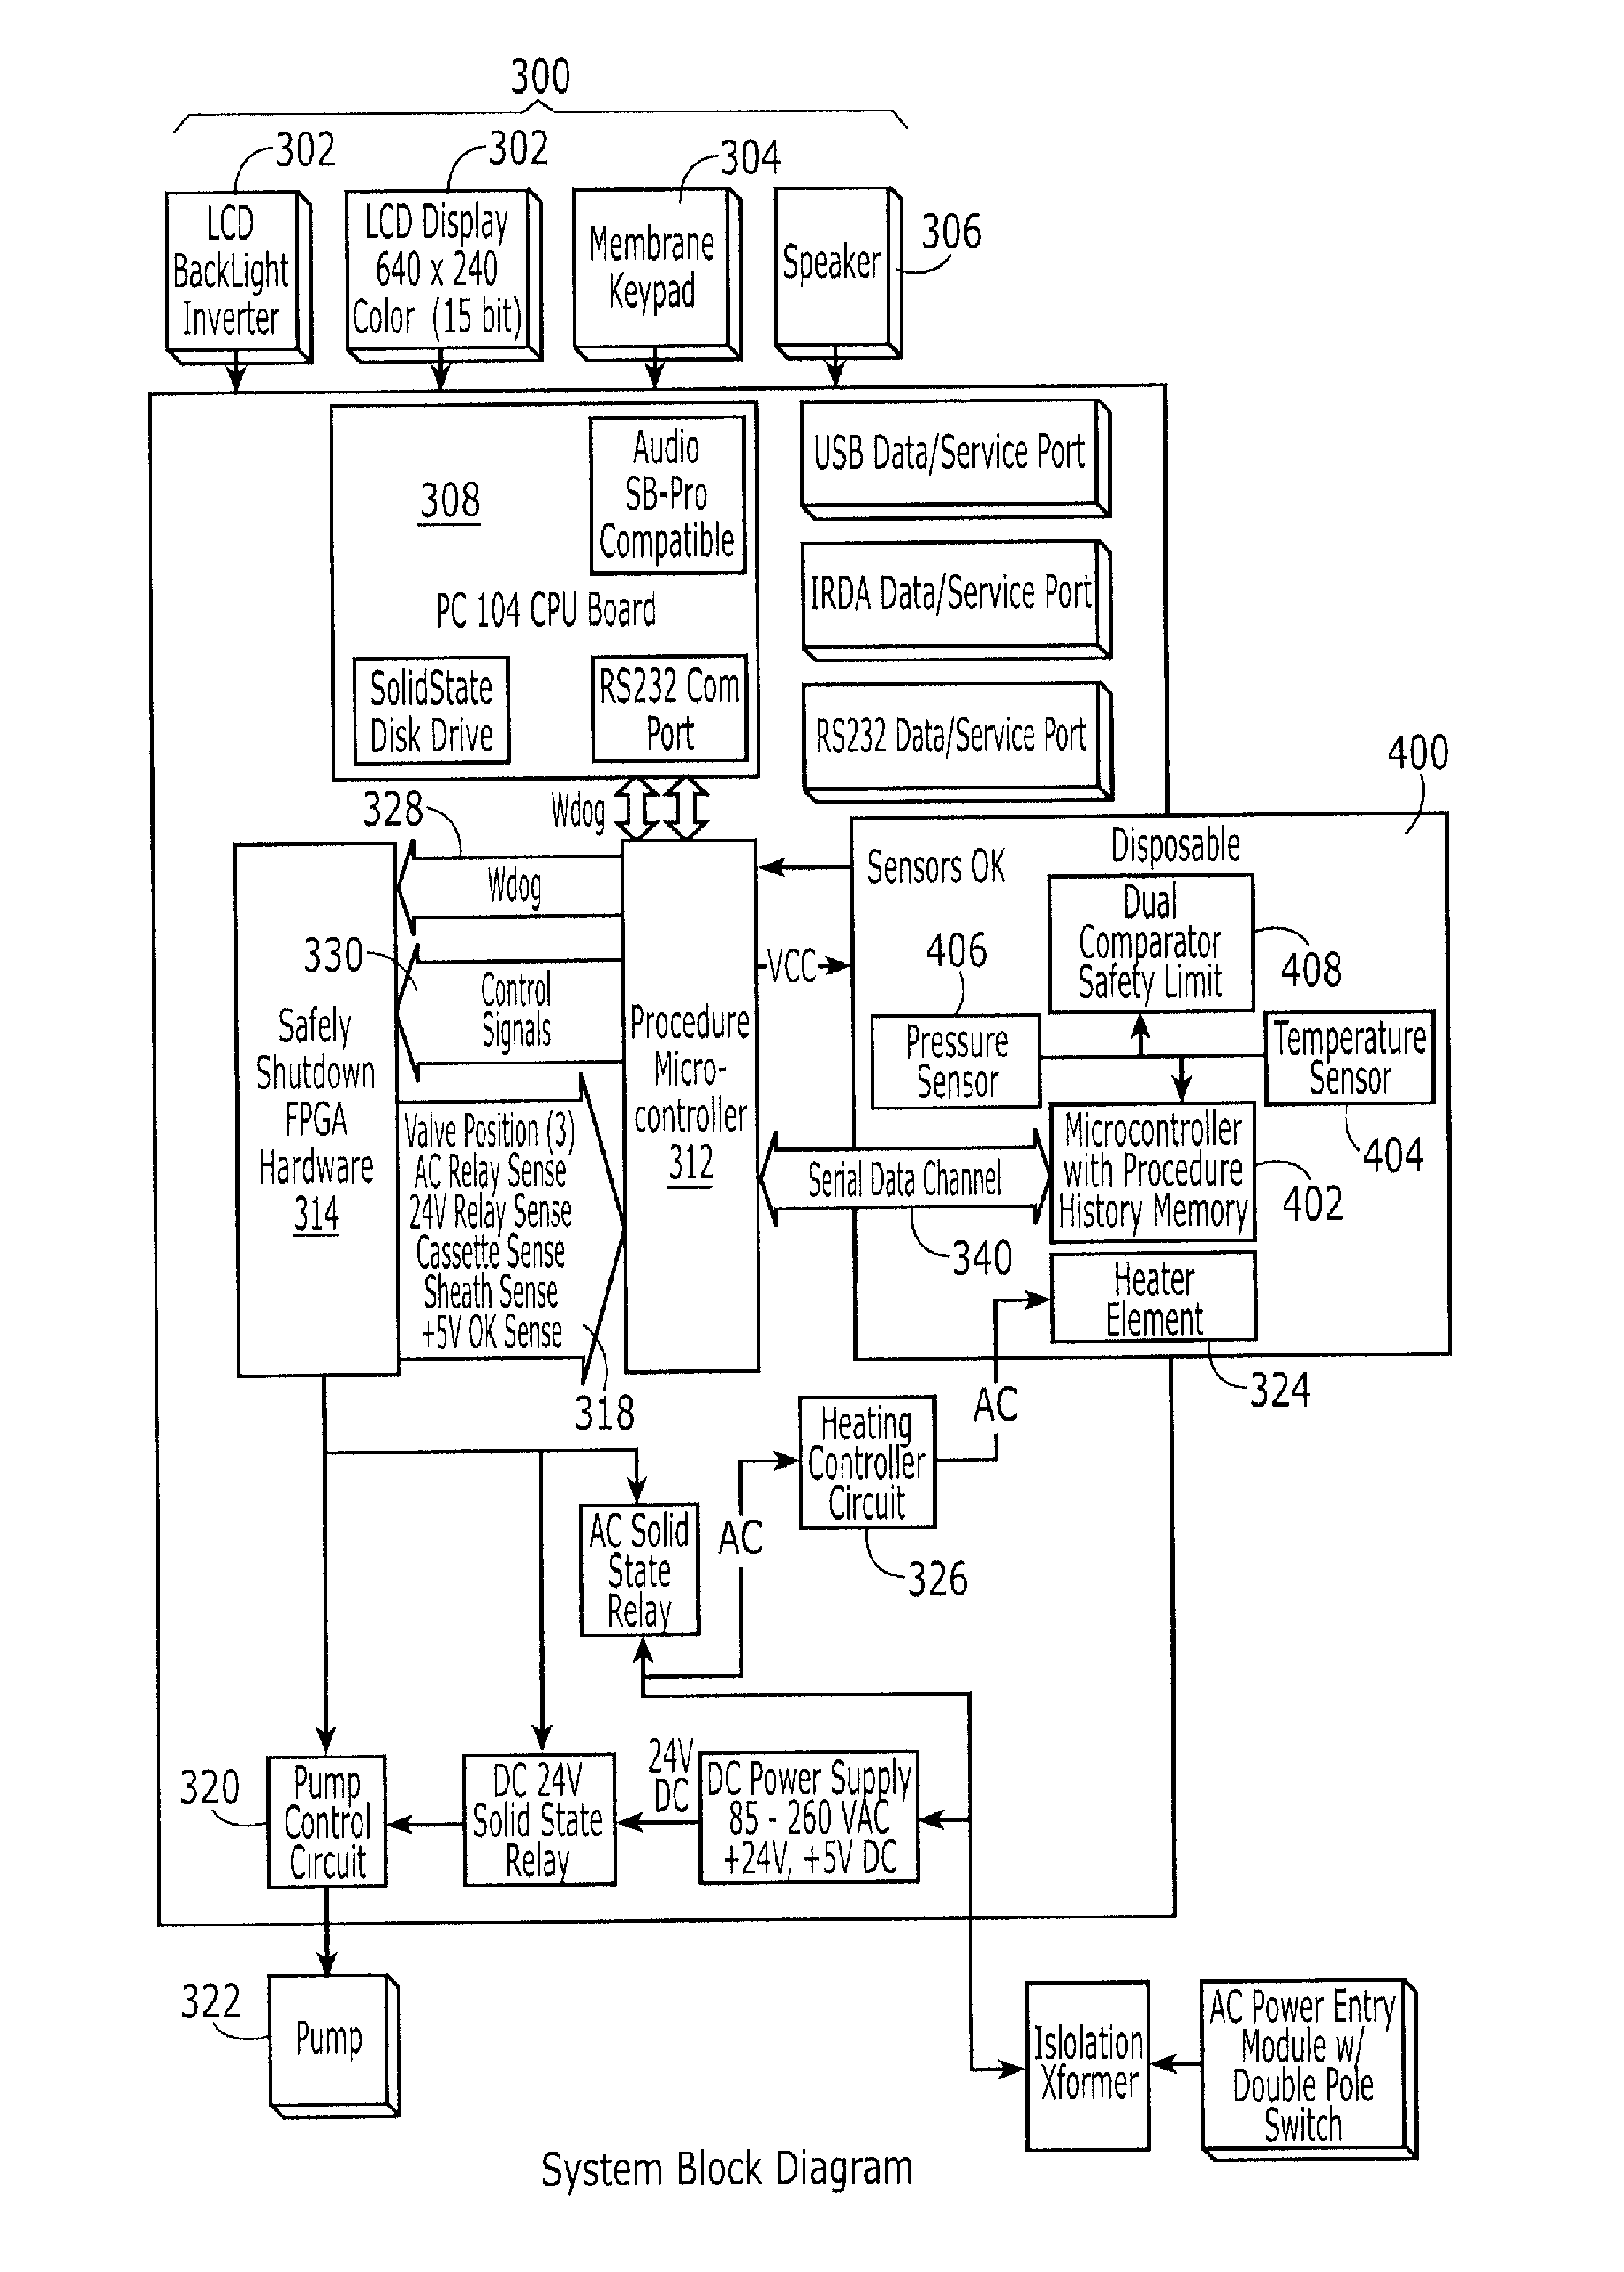 Device for circulating heated fluid